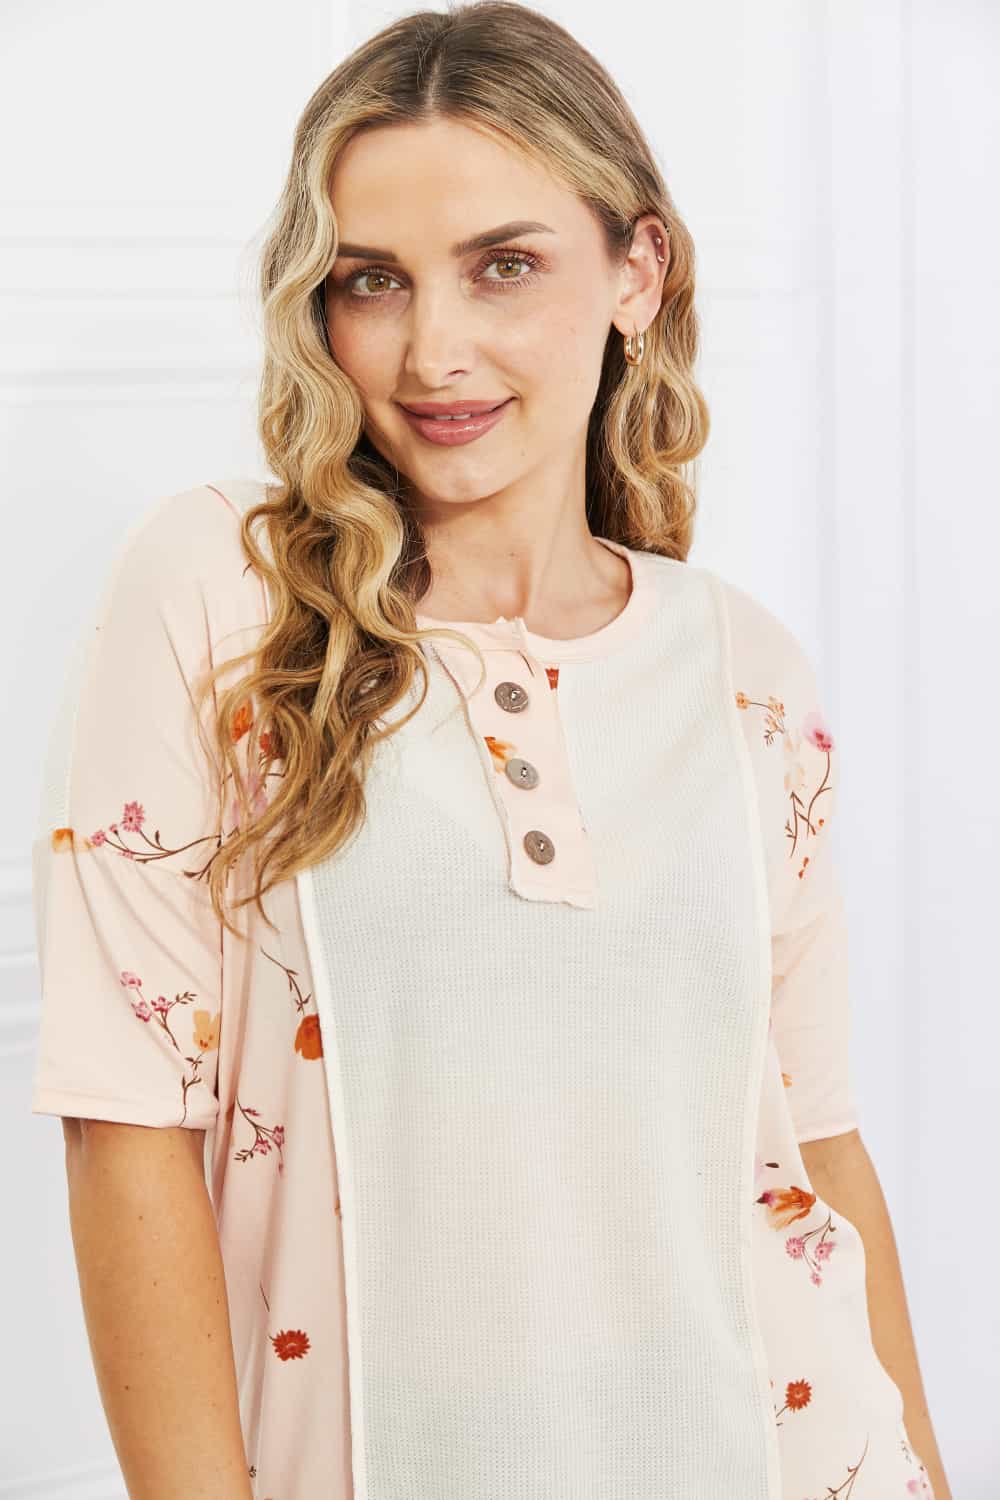 Blossoming Floral Contrast Knit Top in Blush - AnnRose Boutique